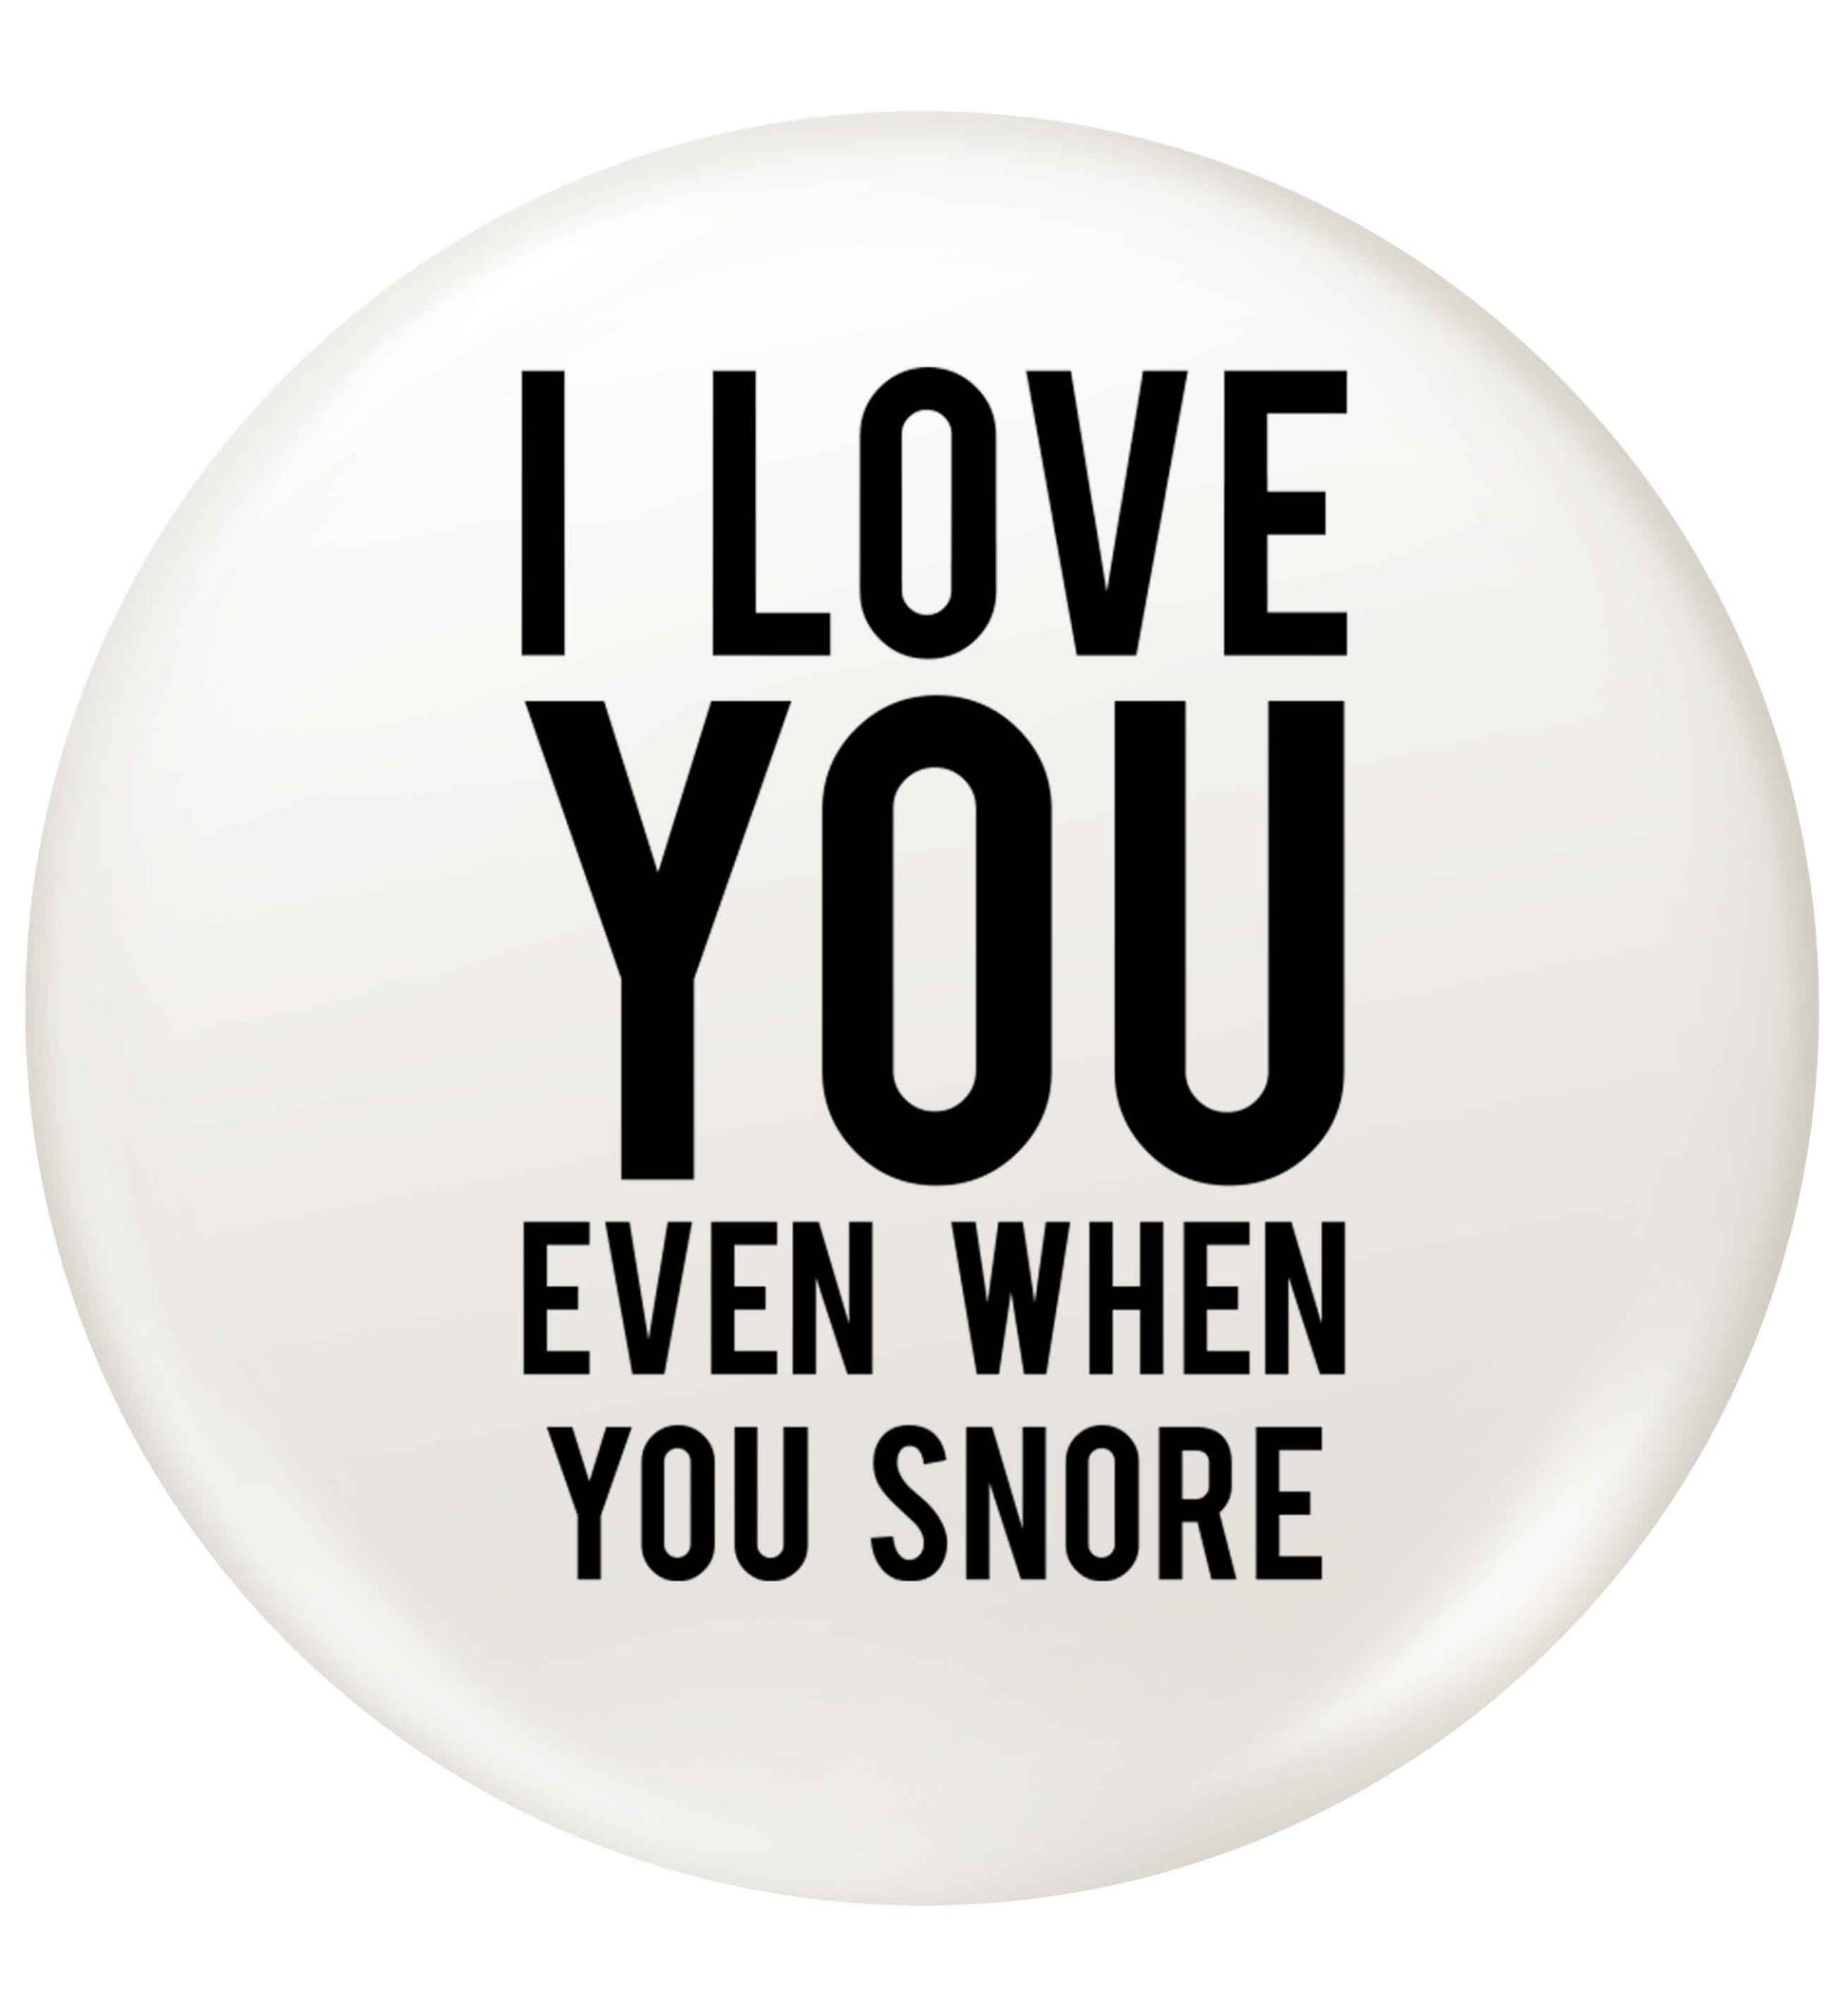 I love you even when you snore small 25mm Pin badge